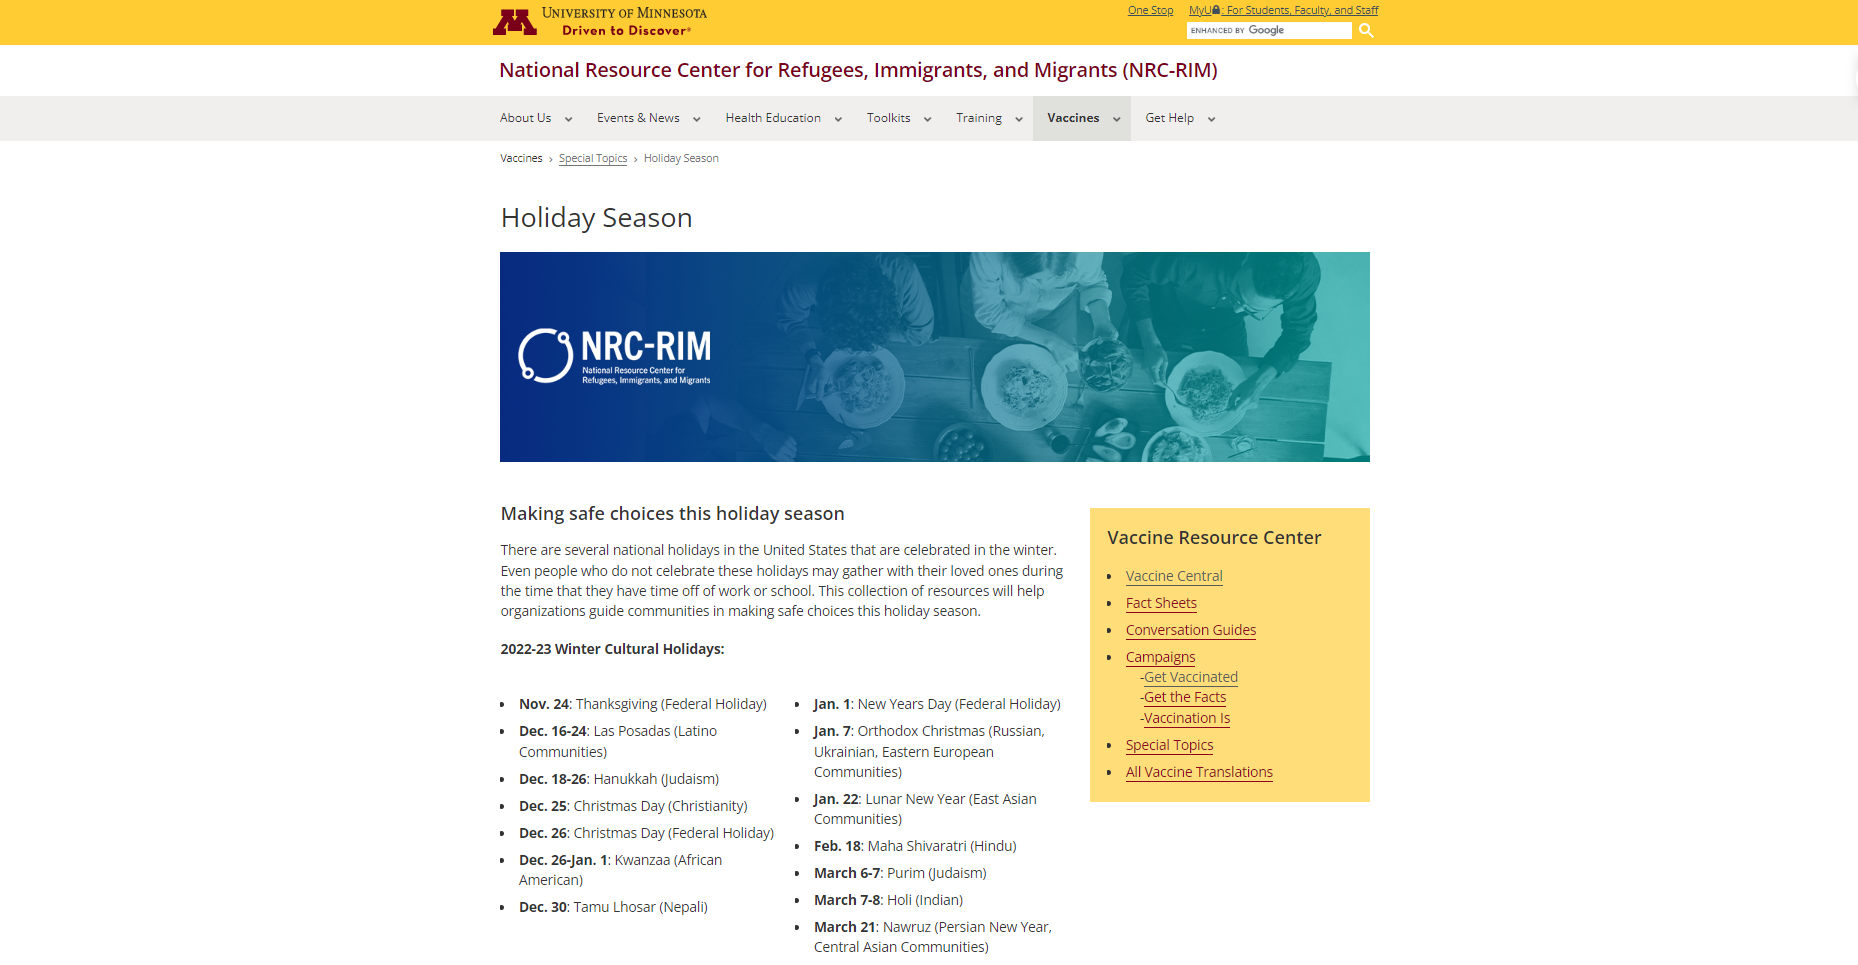 Website with University of Minnesota logo and NRC-RIM logo at the top of the page. Website is a white background with black text and a yellow text box to the right side.